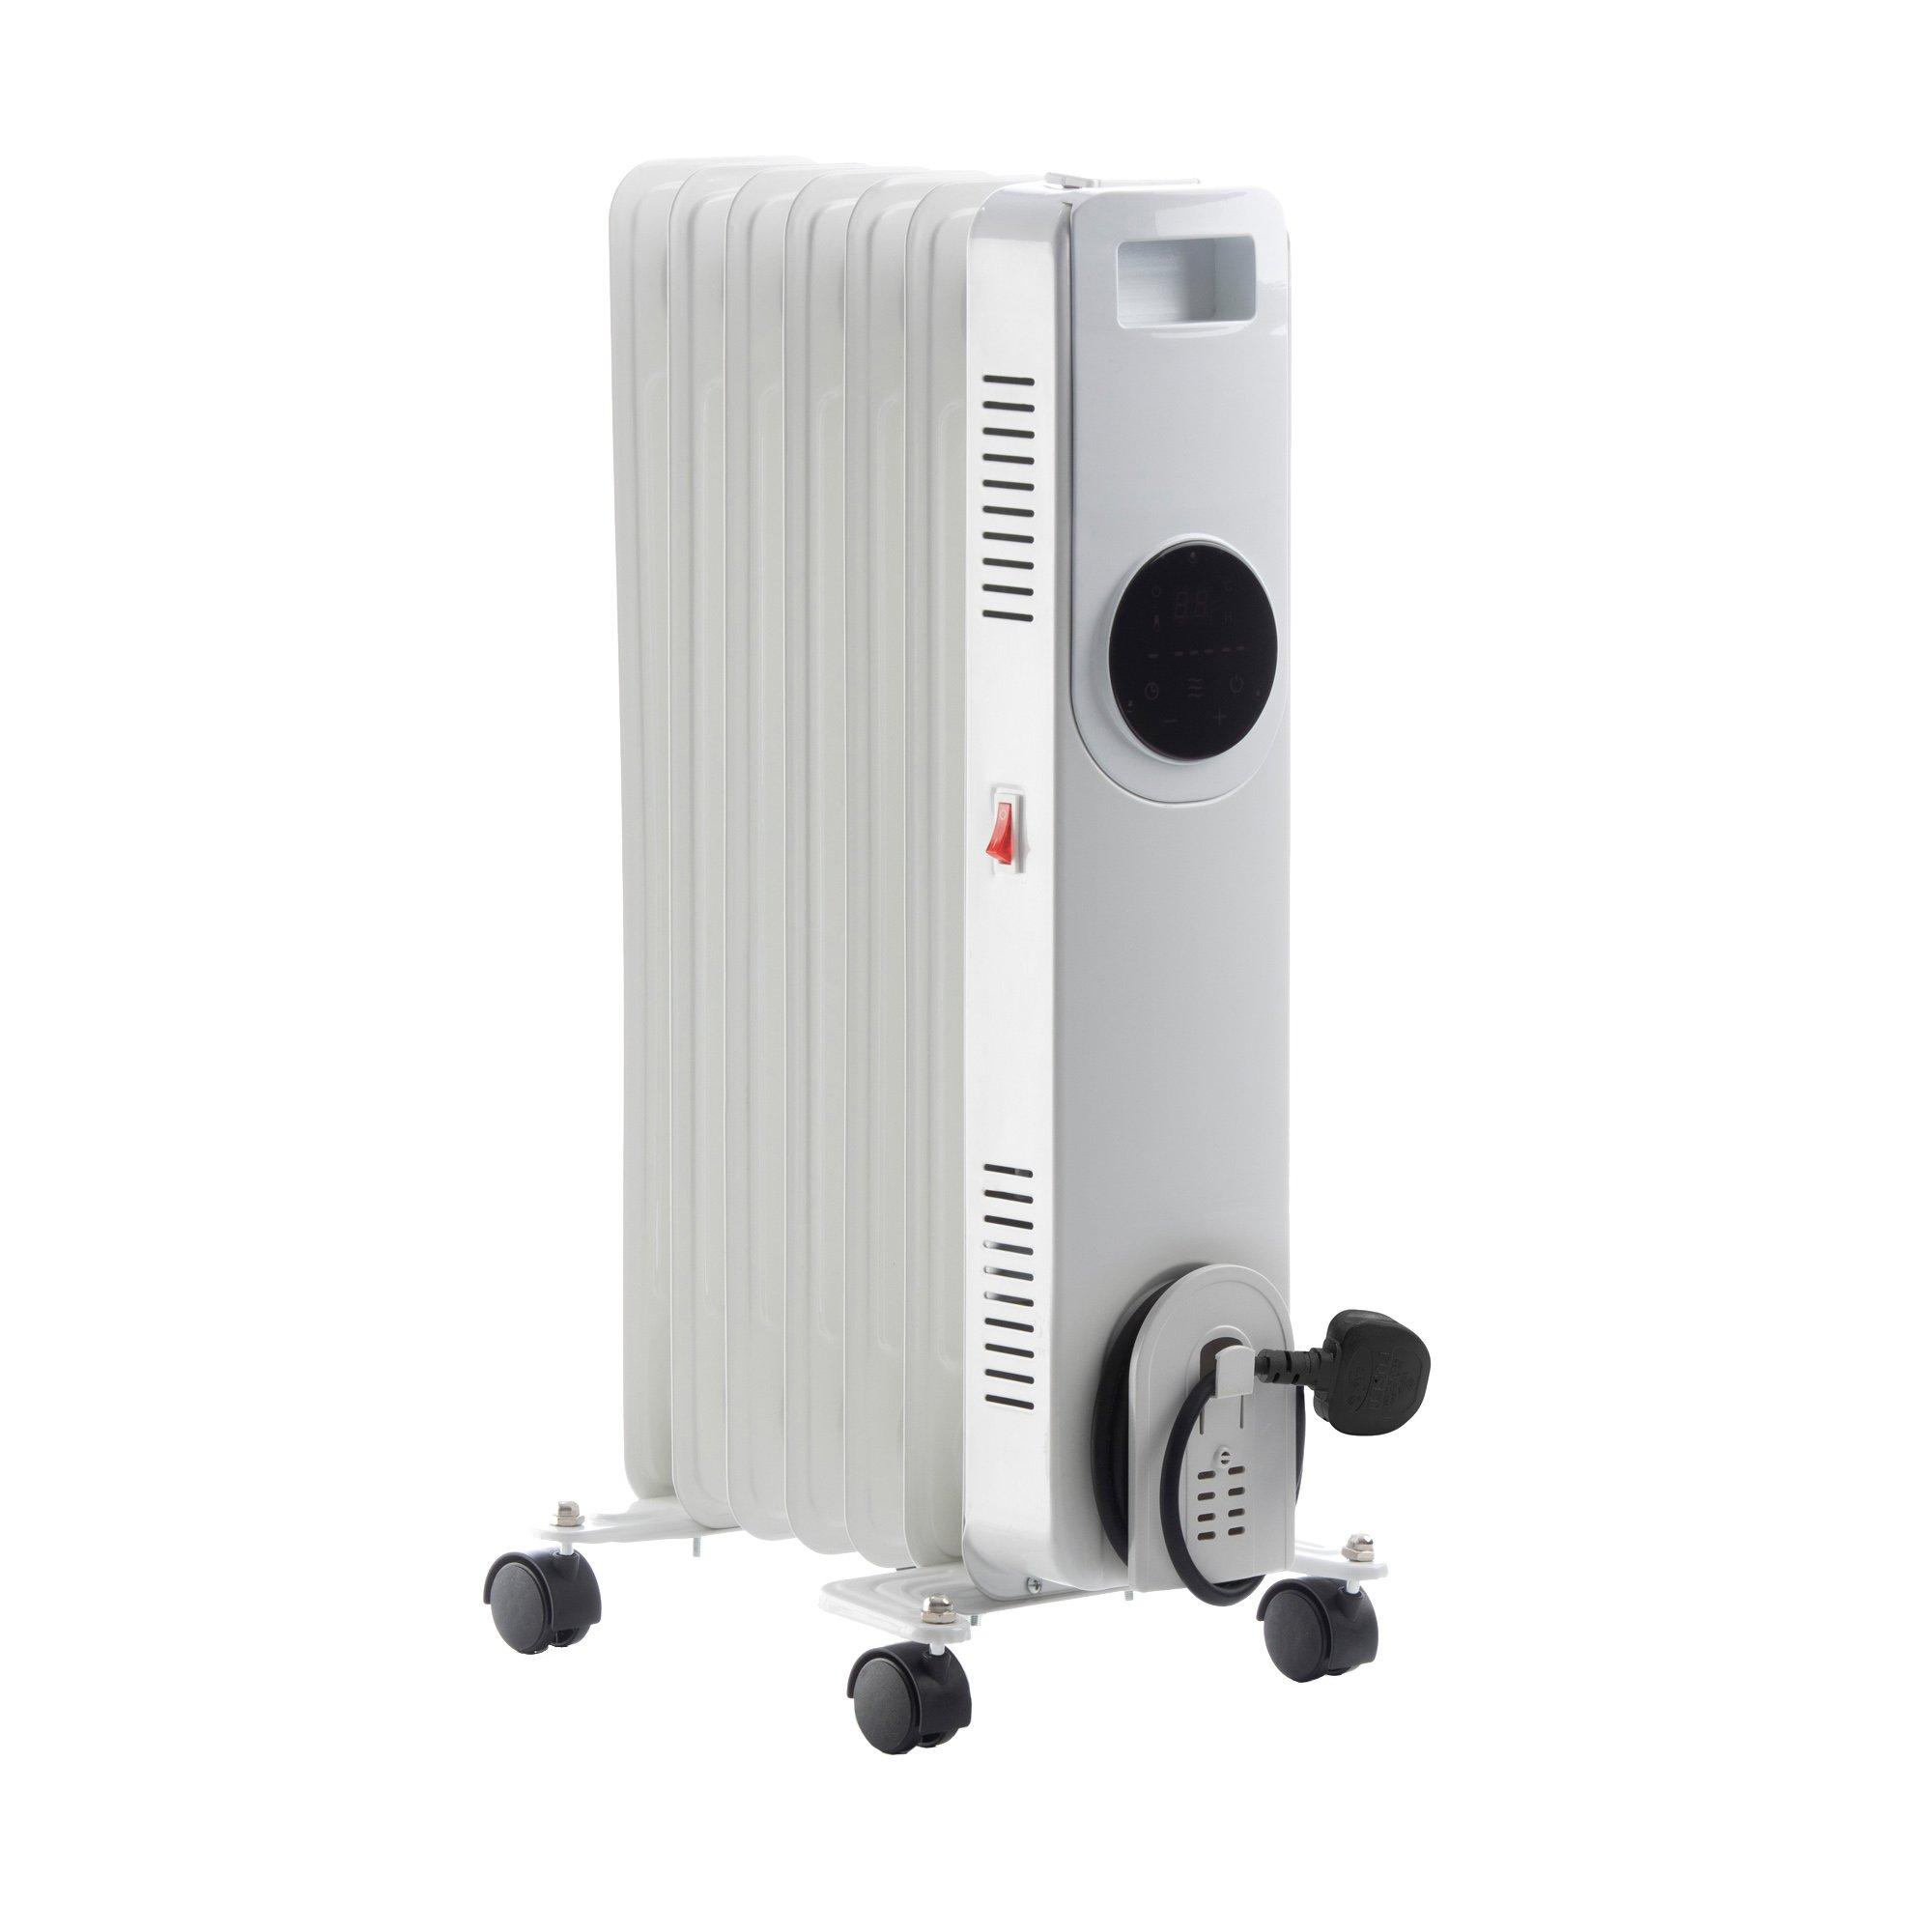 1500W 7-Fin Oil Filled Radiator Portable Electric Heater With LCD and Remote Control White